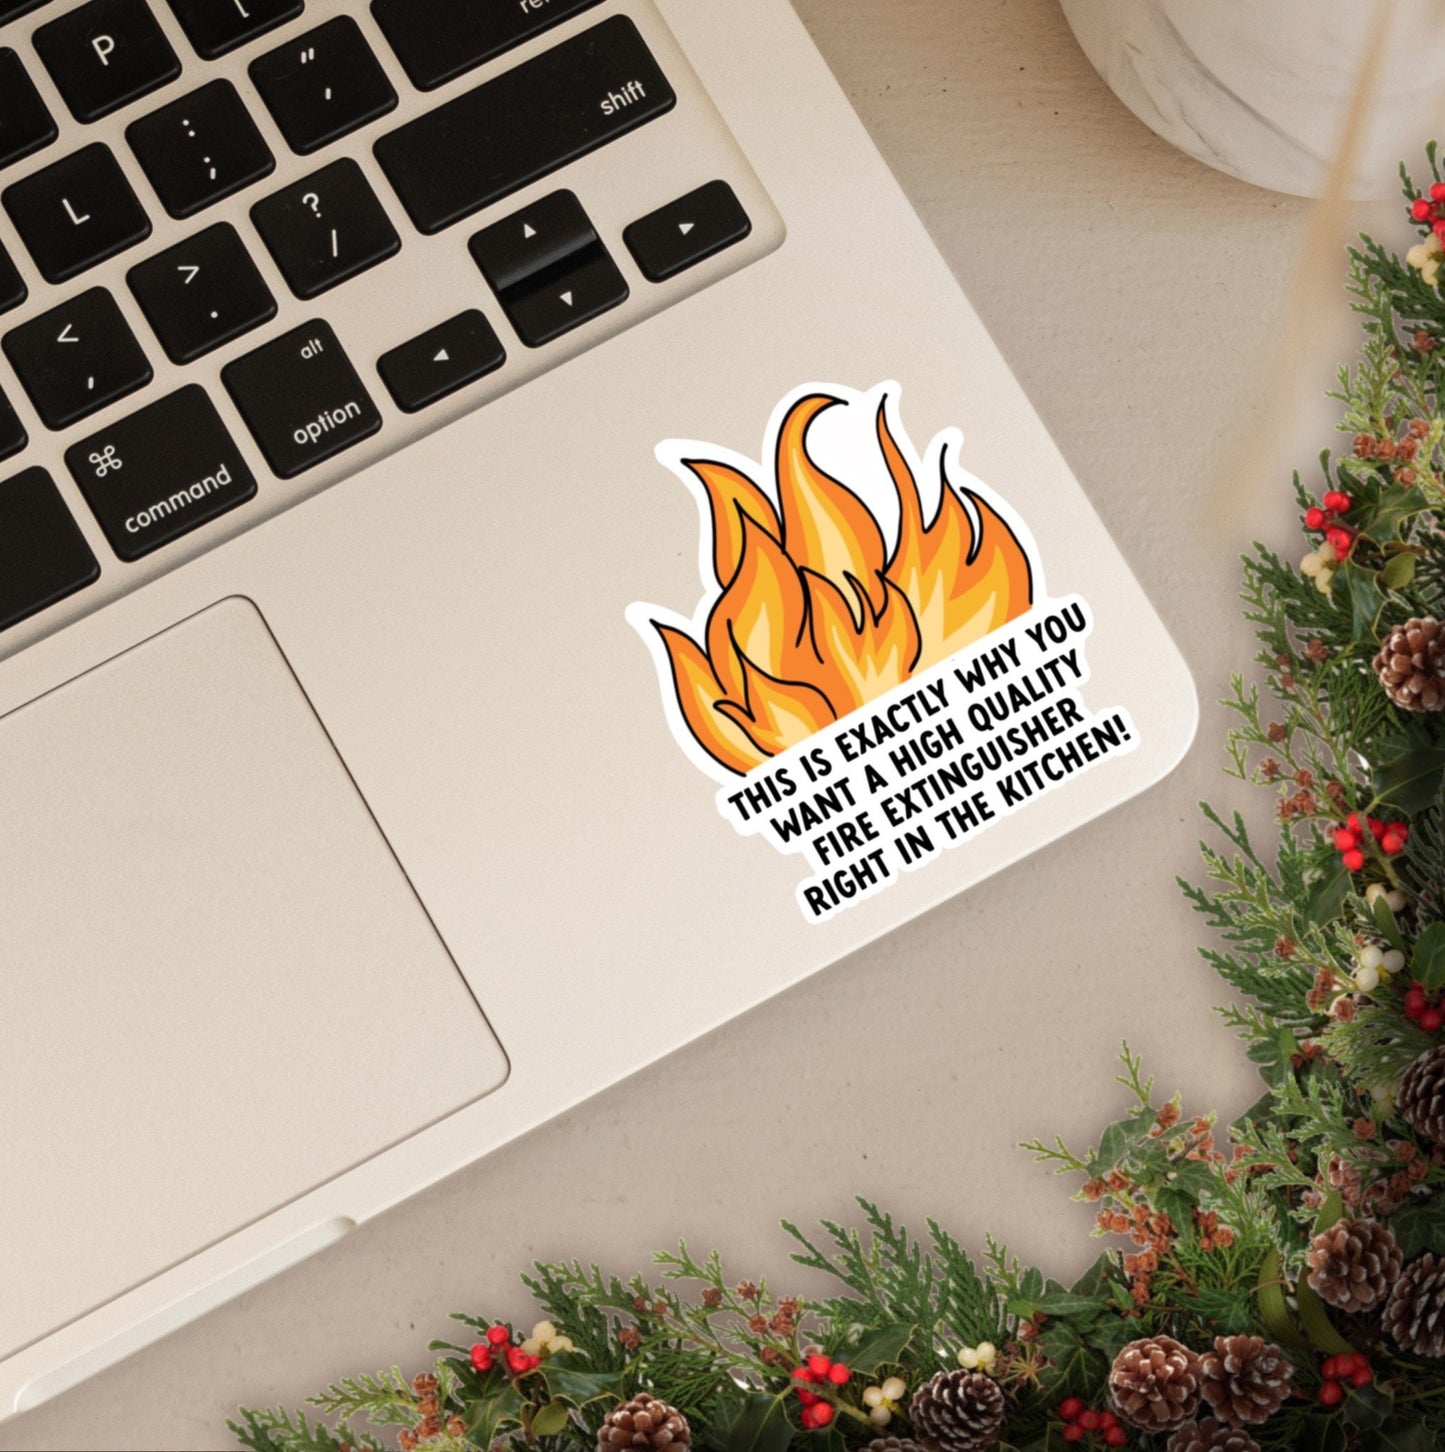 That's Why You Want a Quality Fire Extinguisher Right There In The Kitchen | The Santa Clause Stickers